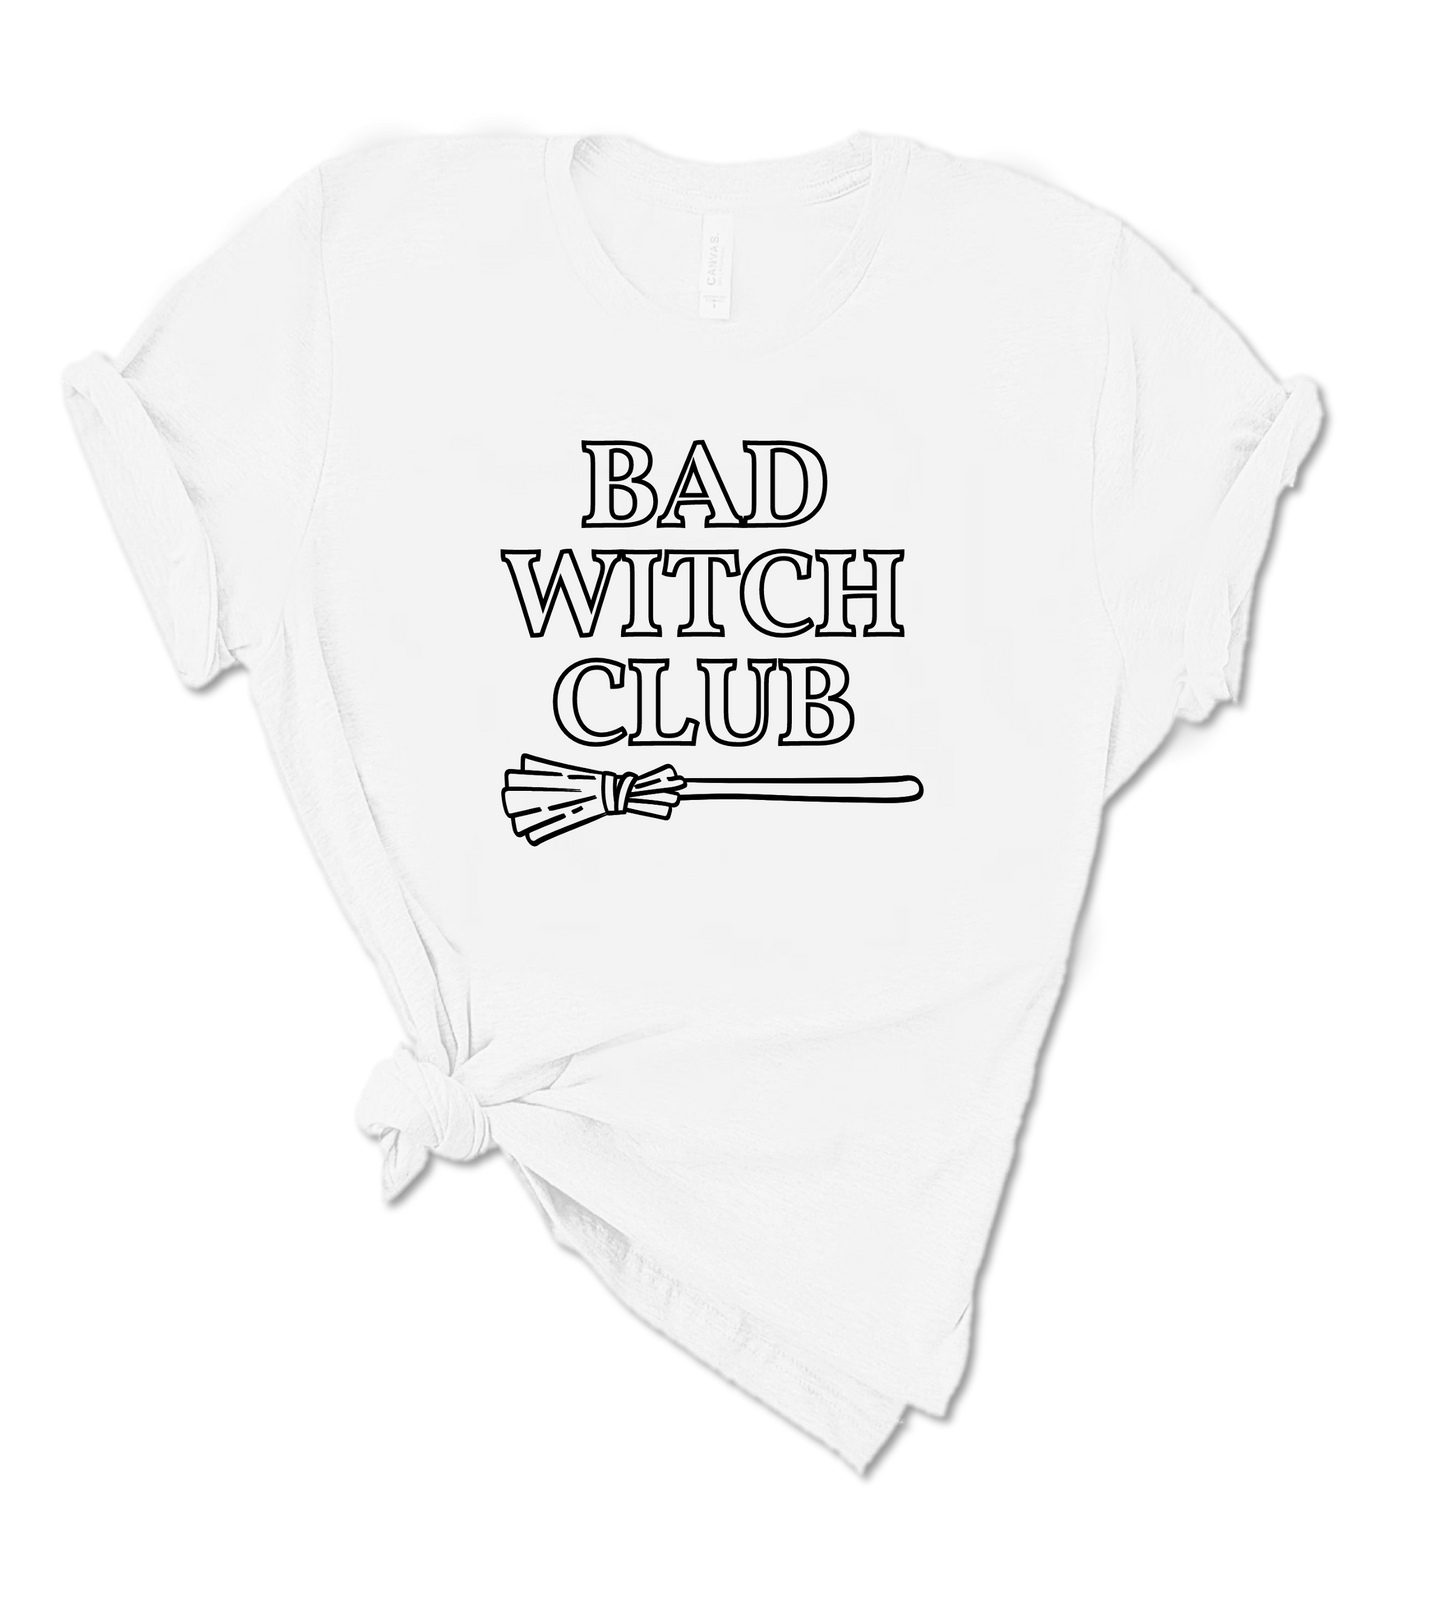 BAD WITCHES CLUB